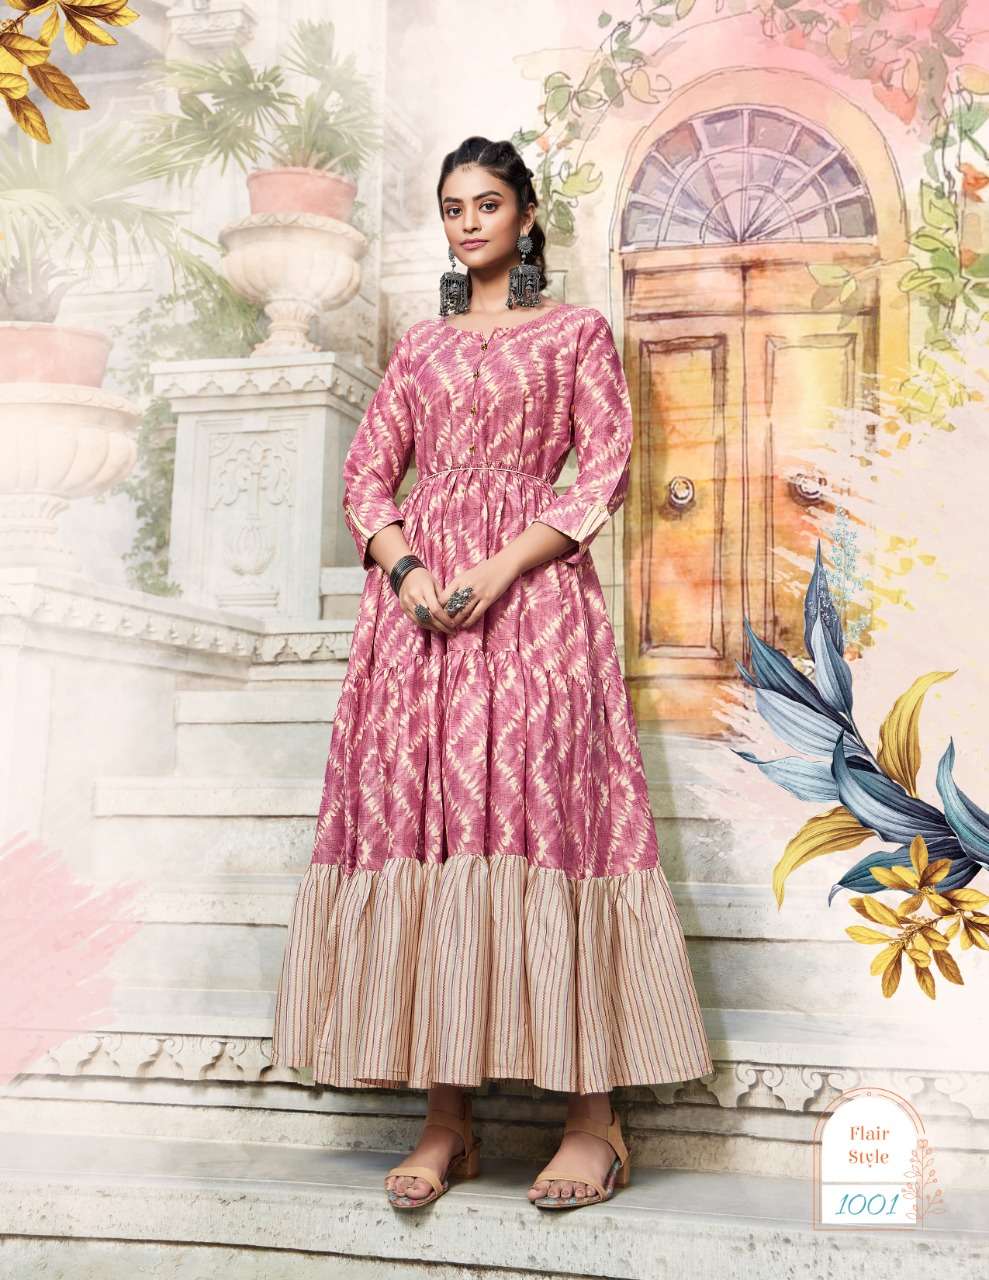 Flair Style Vol-1 By Passion Tree 1001 To 1006 Series Designer Stylish Fancy Colorful Beautiful Party Wear & Ethnic Wear Collection Viscose Capsule Print Gown At Wholesale Price